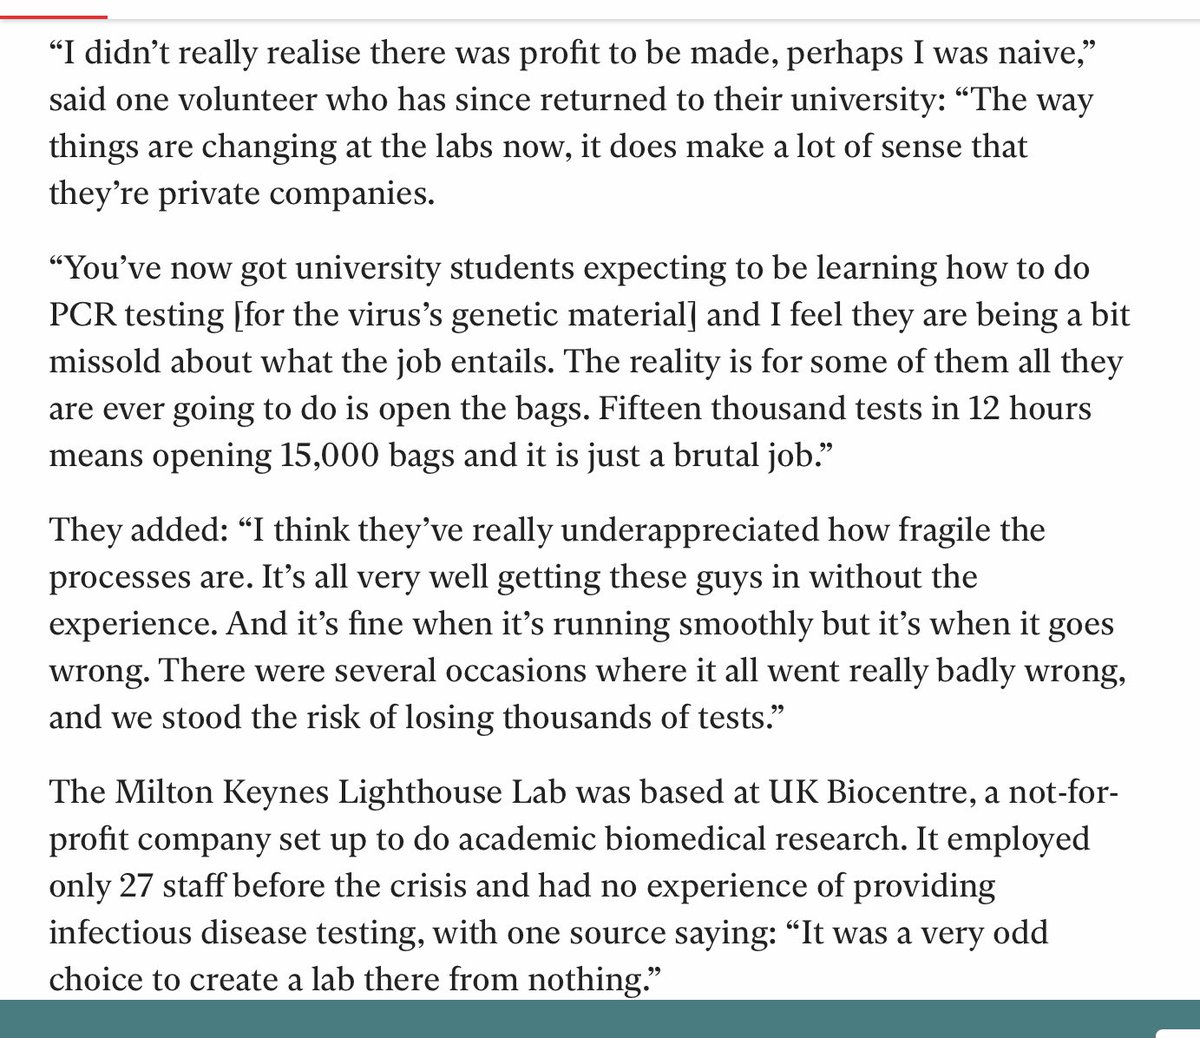 On several occasions, due to lack of experienced personnel, there was a real danger of losing thousands of tests.It looks to me as if they DID lose thousands of tests.One Company, set up and supported a lot of taxpayer funded grants was the Milton Keynes Lab, 12 staff.